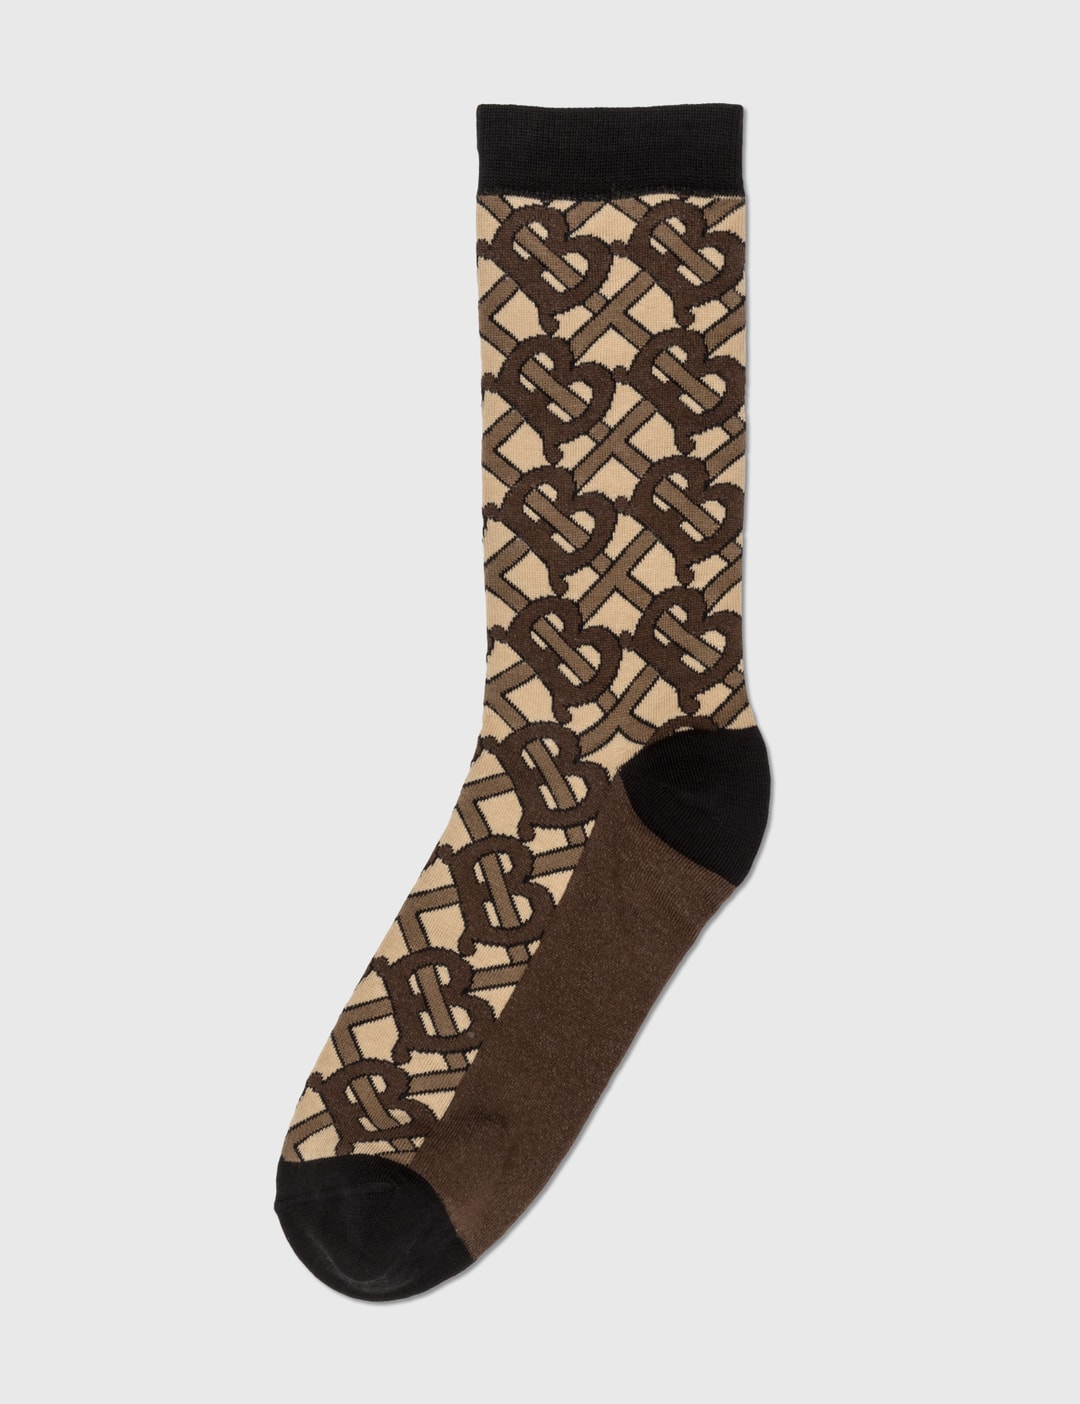 Burberry - Monogram Intarsia Cotton Blend Socks | HBX - Globally Curated  Fashion and Lifestyle by Hypebeast